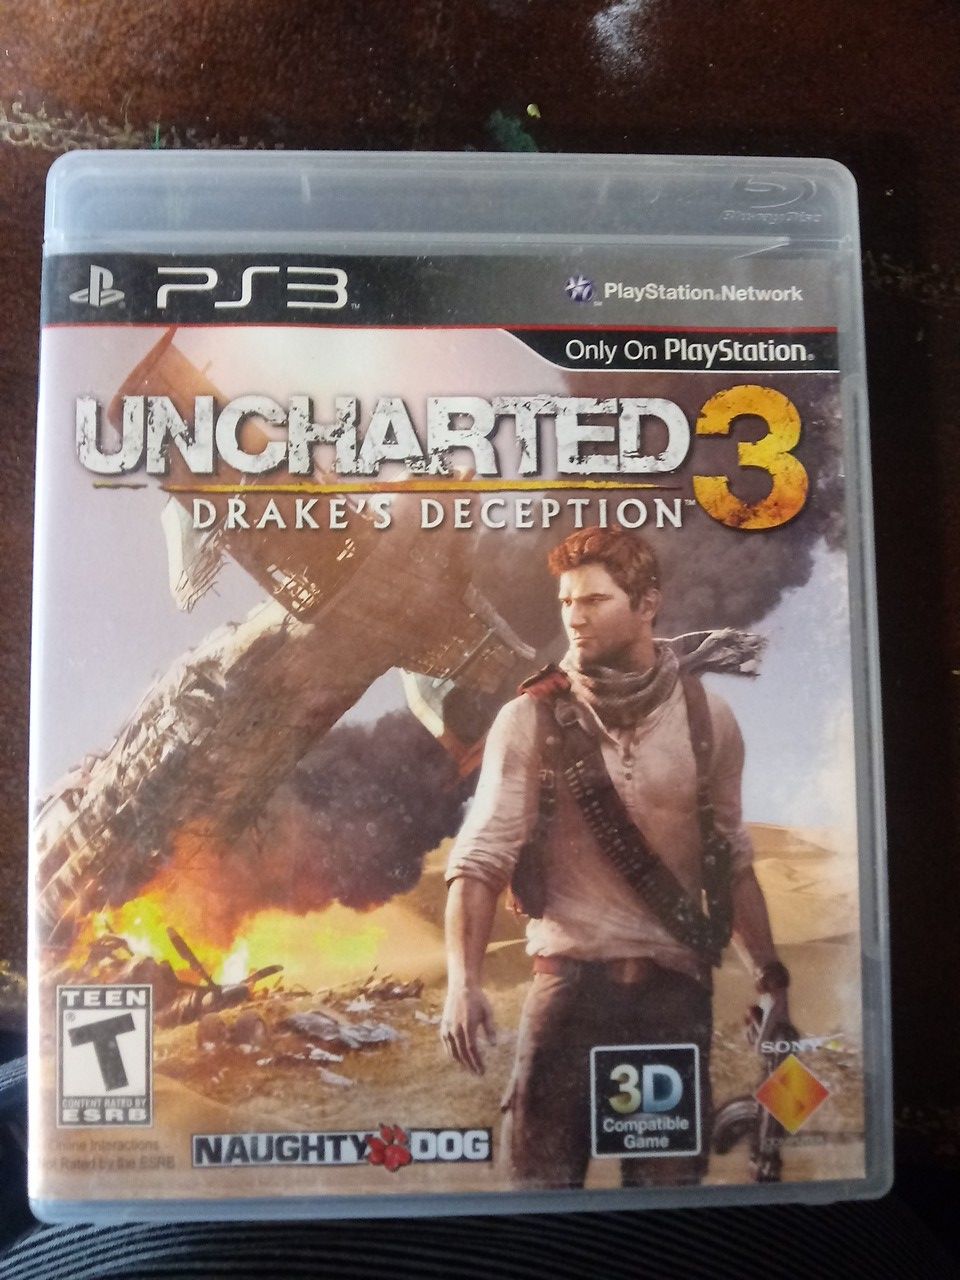 PS3 uncharted 3 drake's deception